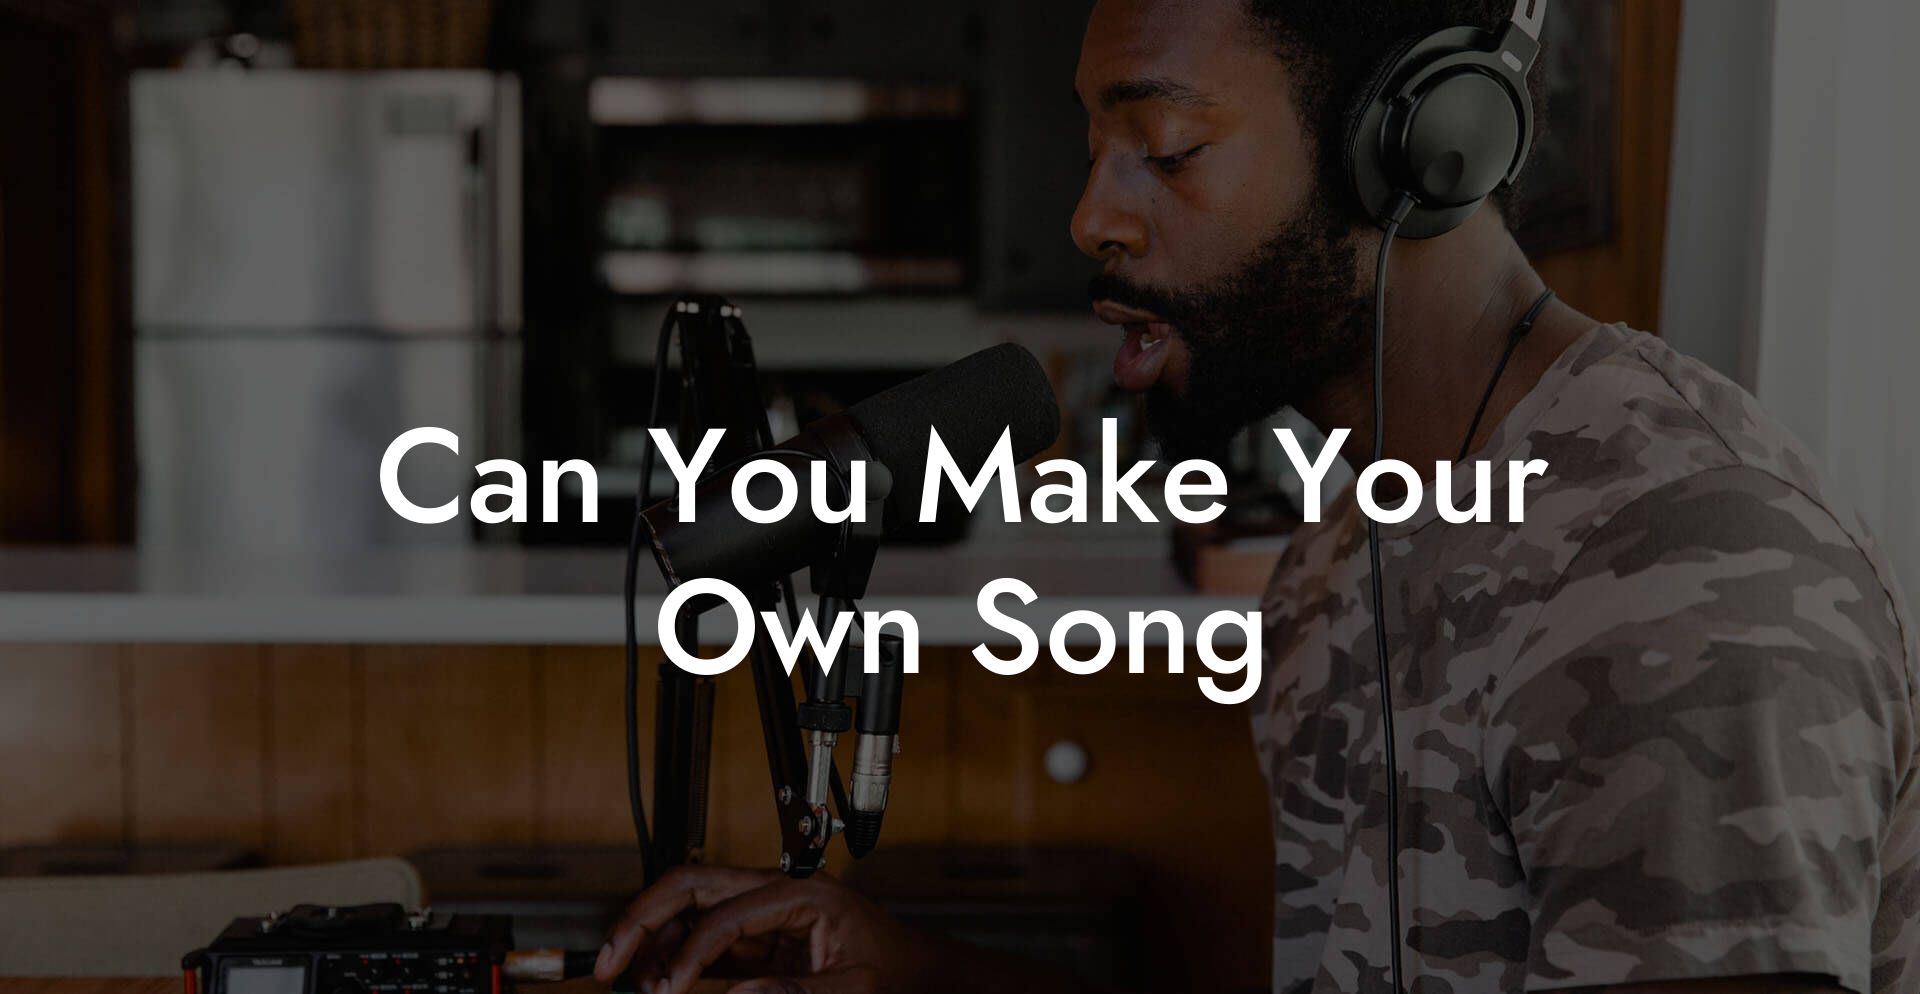 can you make your own song lyric assistant